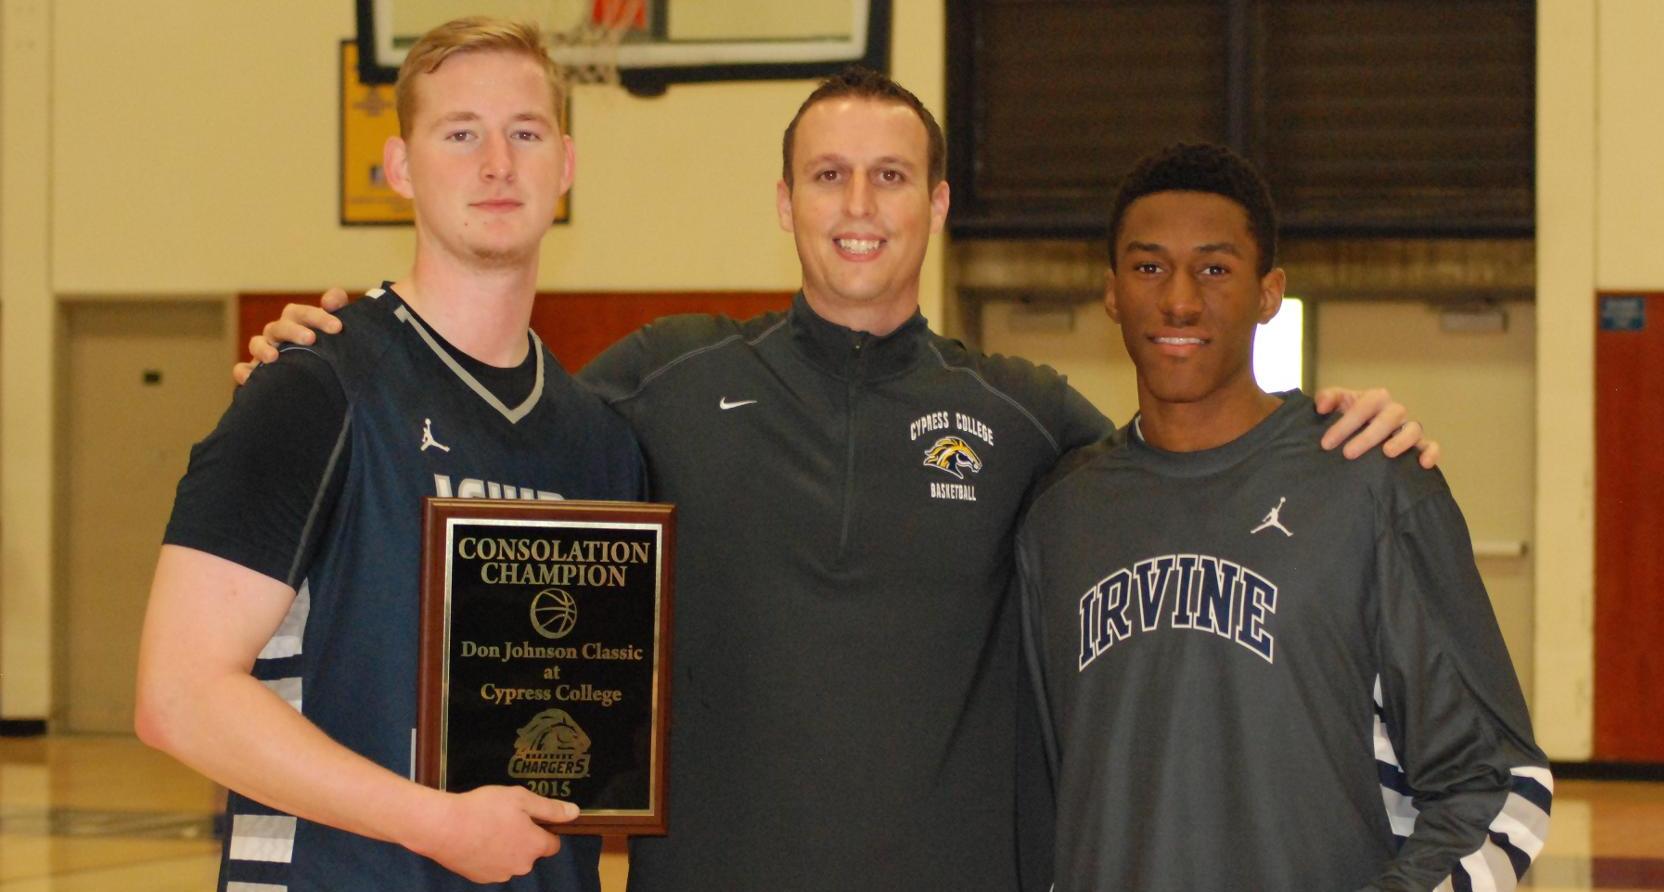 Men's basketball team wins consolation title at Cypress event